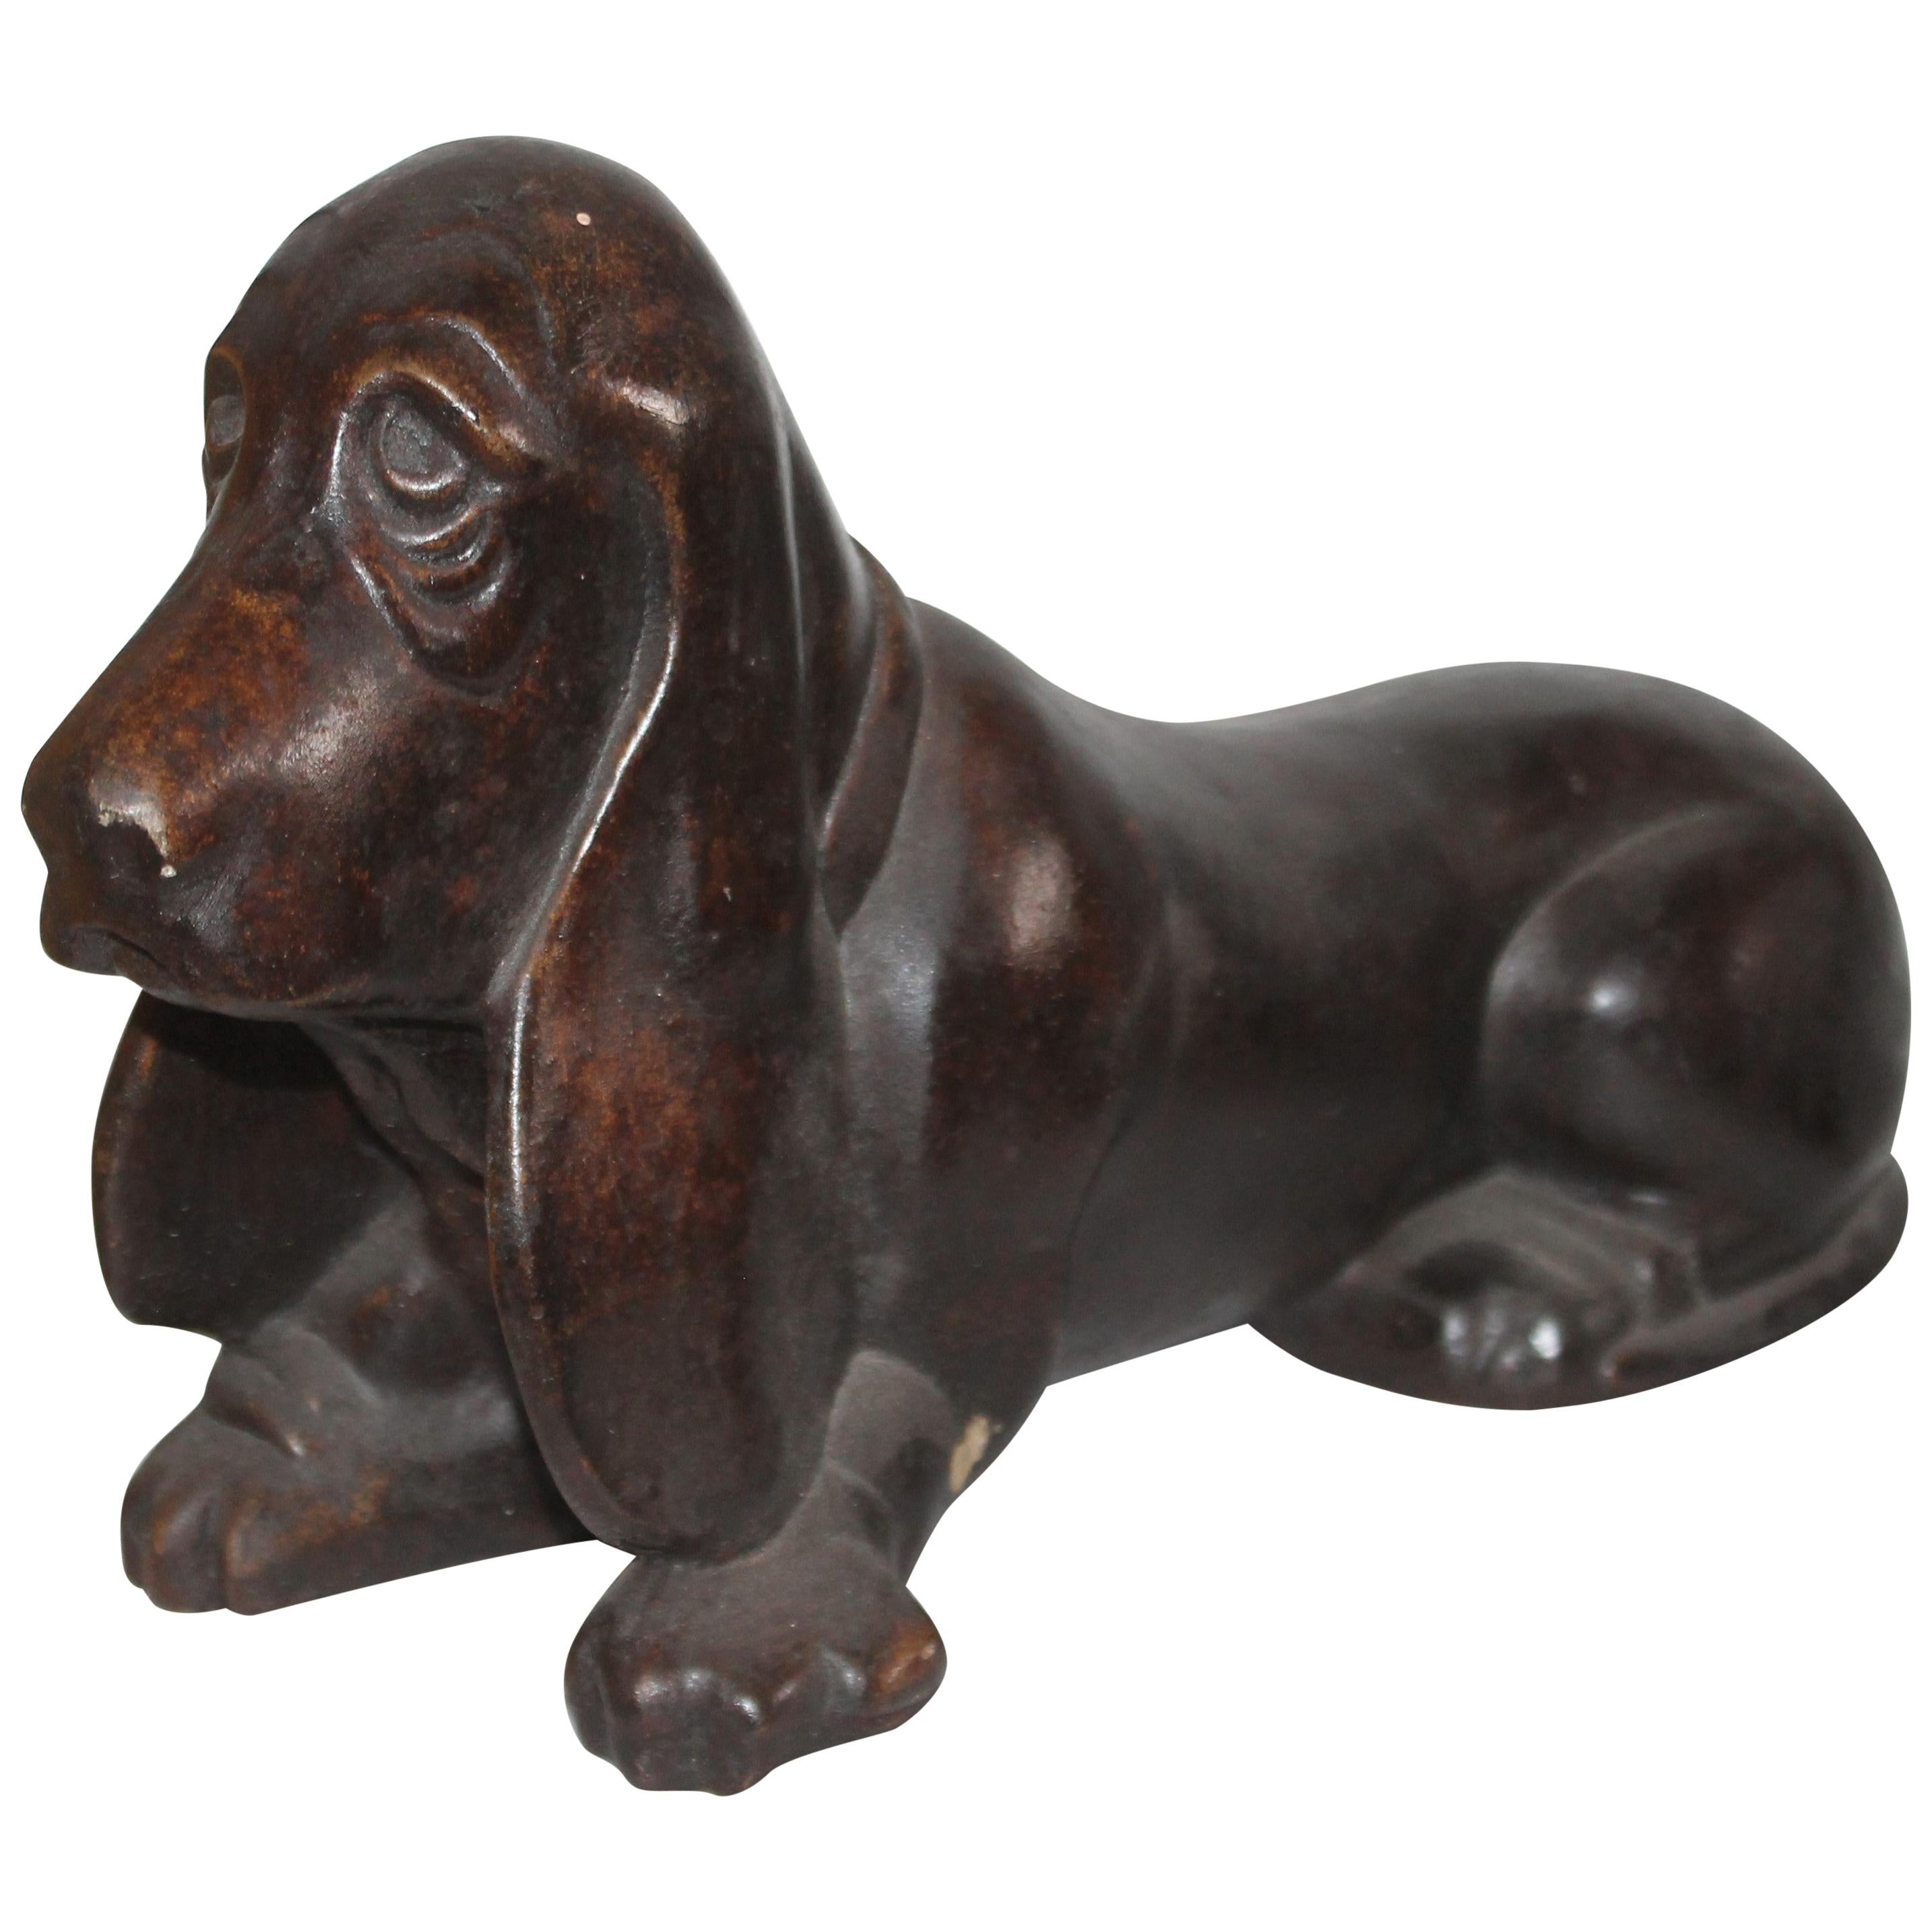 Concrete Dachshund Dog with Original Painted Surface